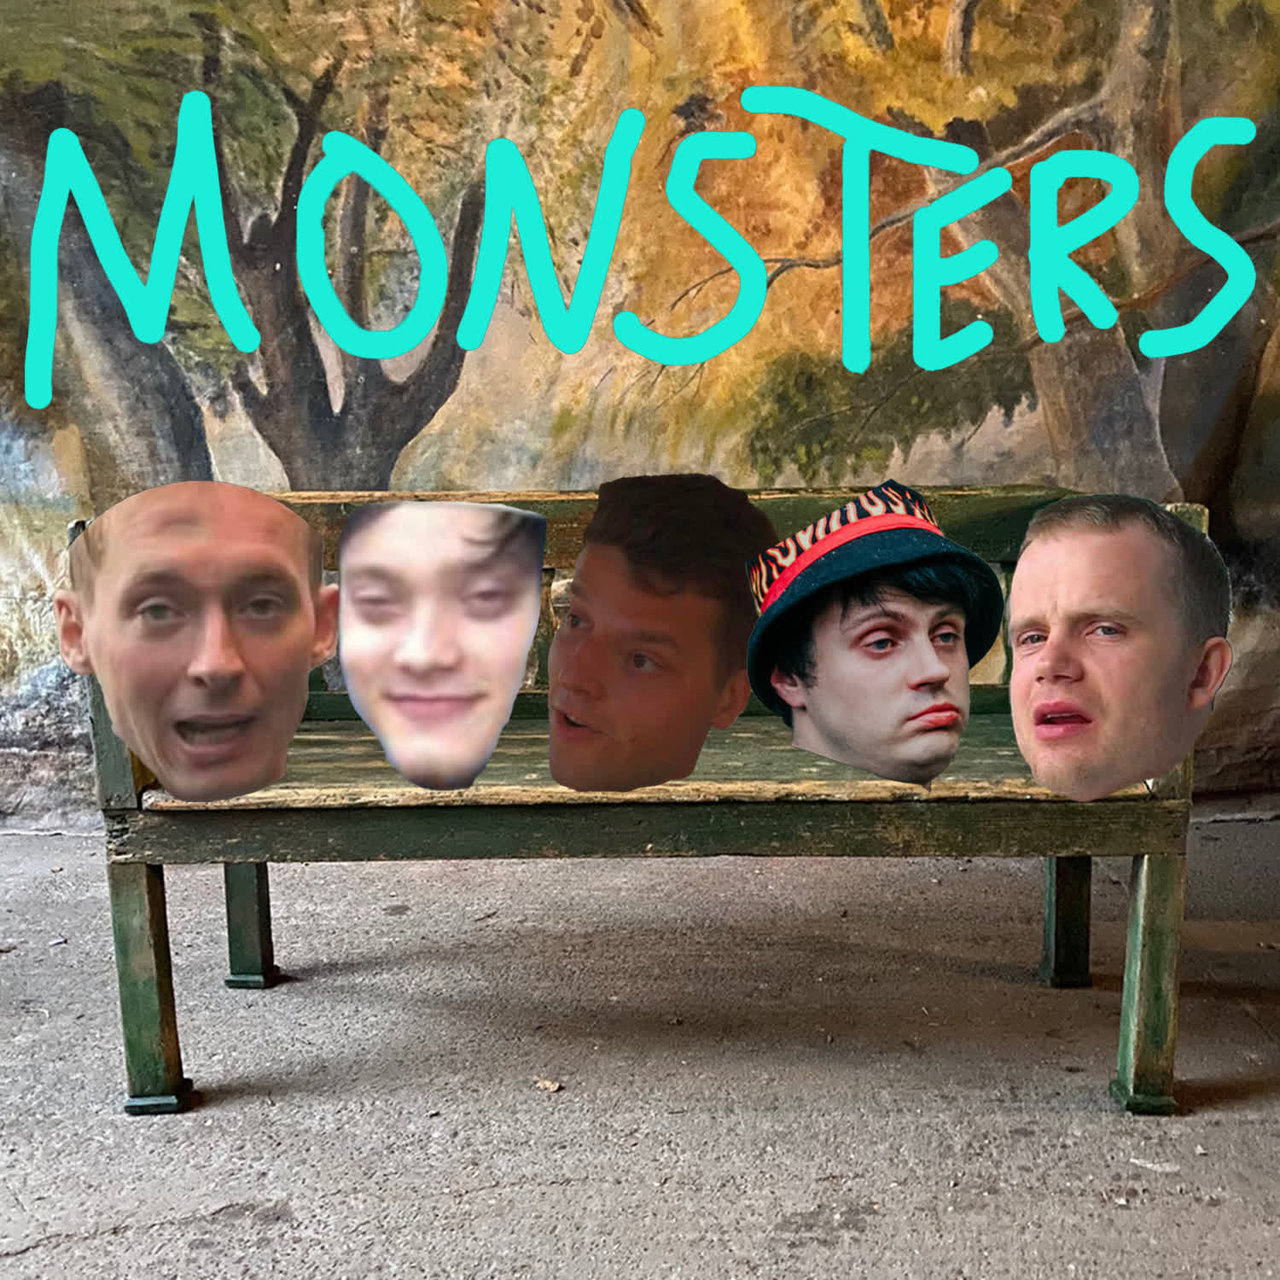 Bedwetters Monsters cover artwork